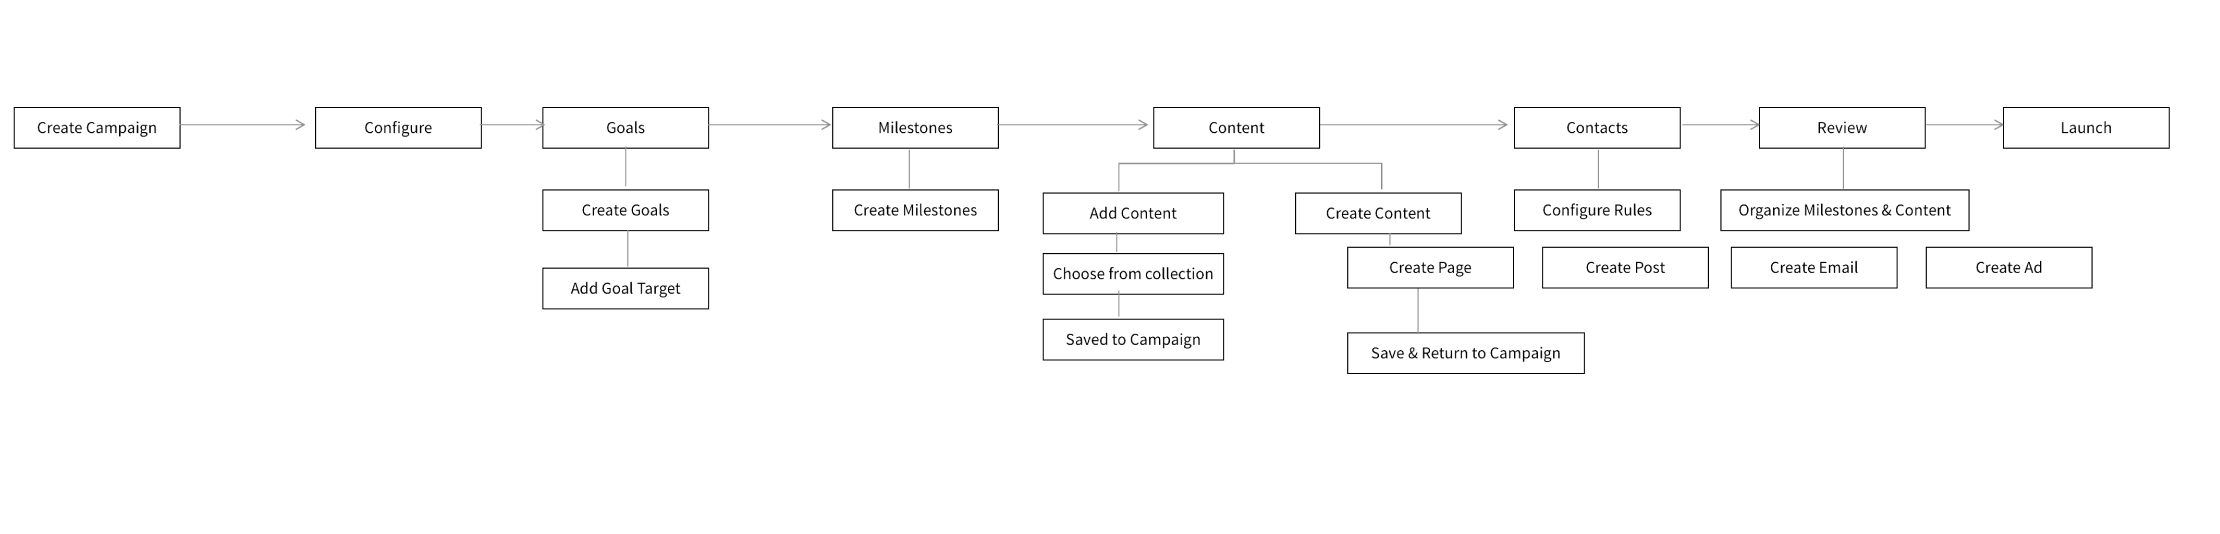 campaign workflow chart